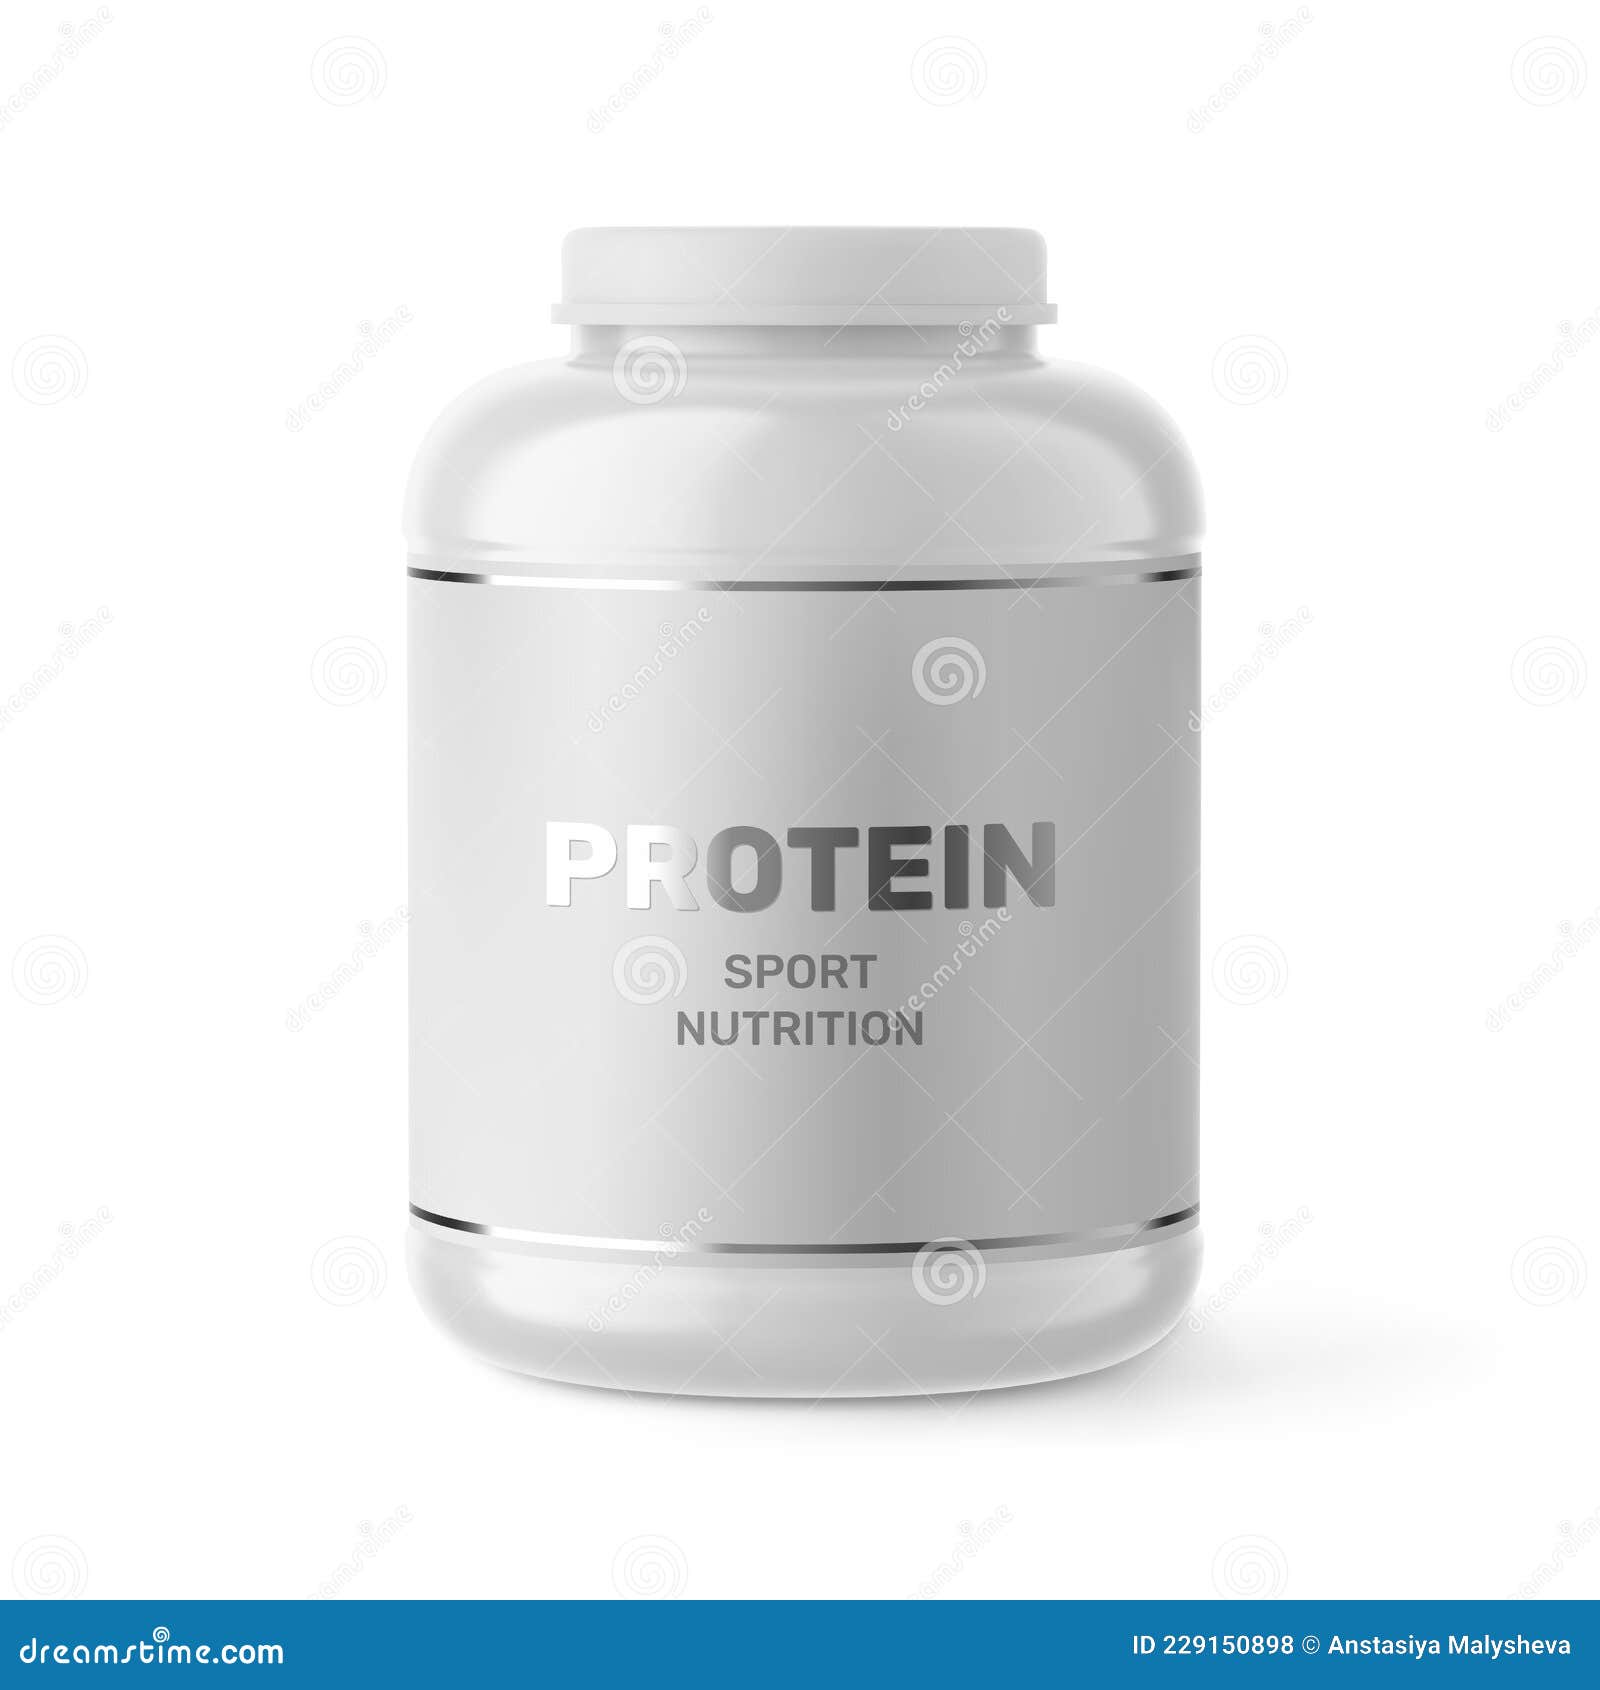 https://thumbs.dreamstime.com/z/sport-nutrition-jar-mockup-lid-label-whey-protein-powder-packaging-dietary-supplements-white-plastic-container-vector-229150898.jpg